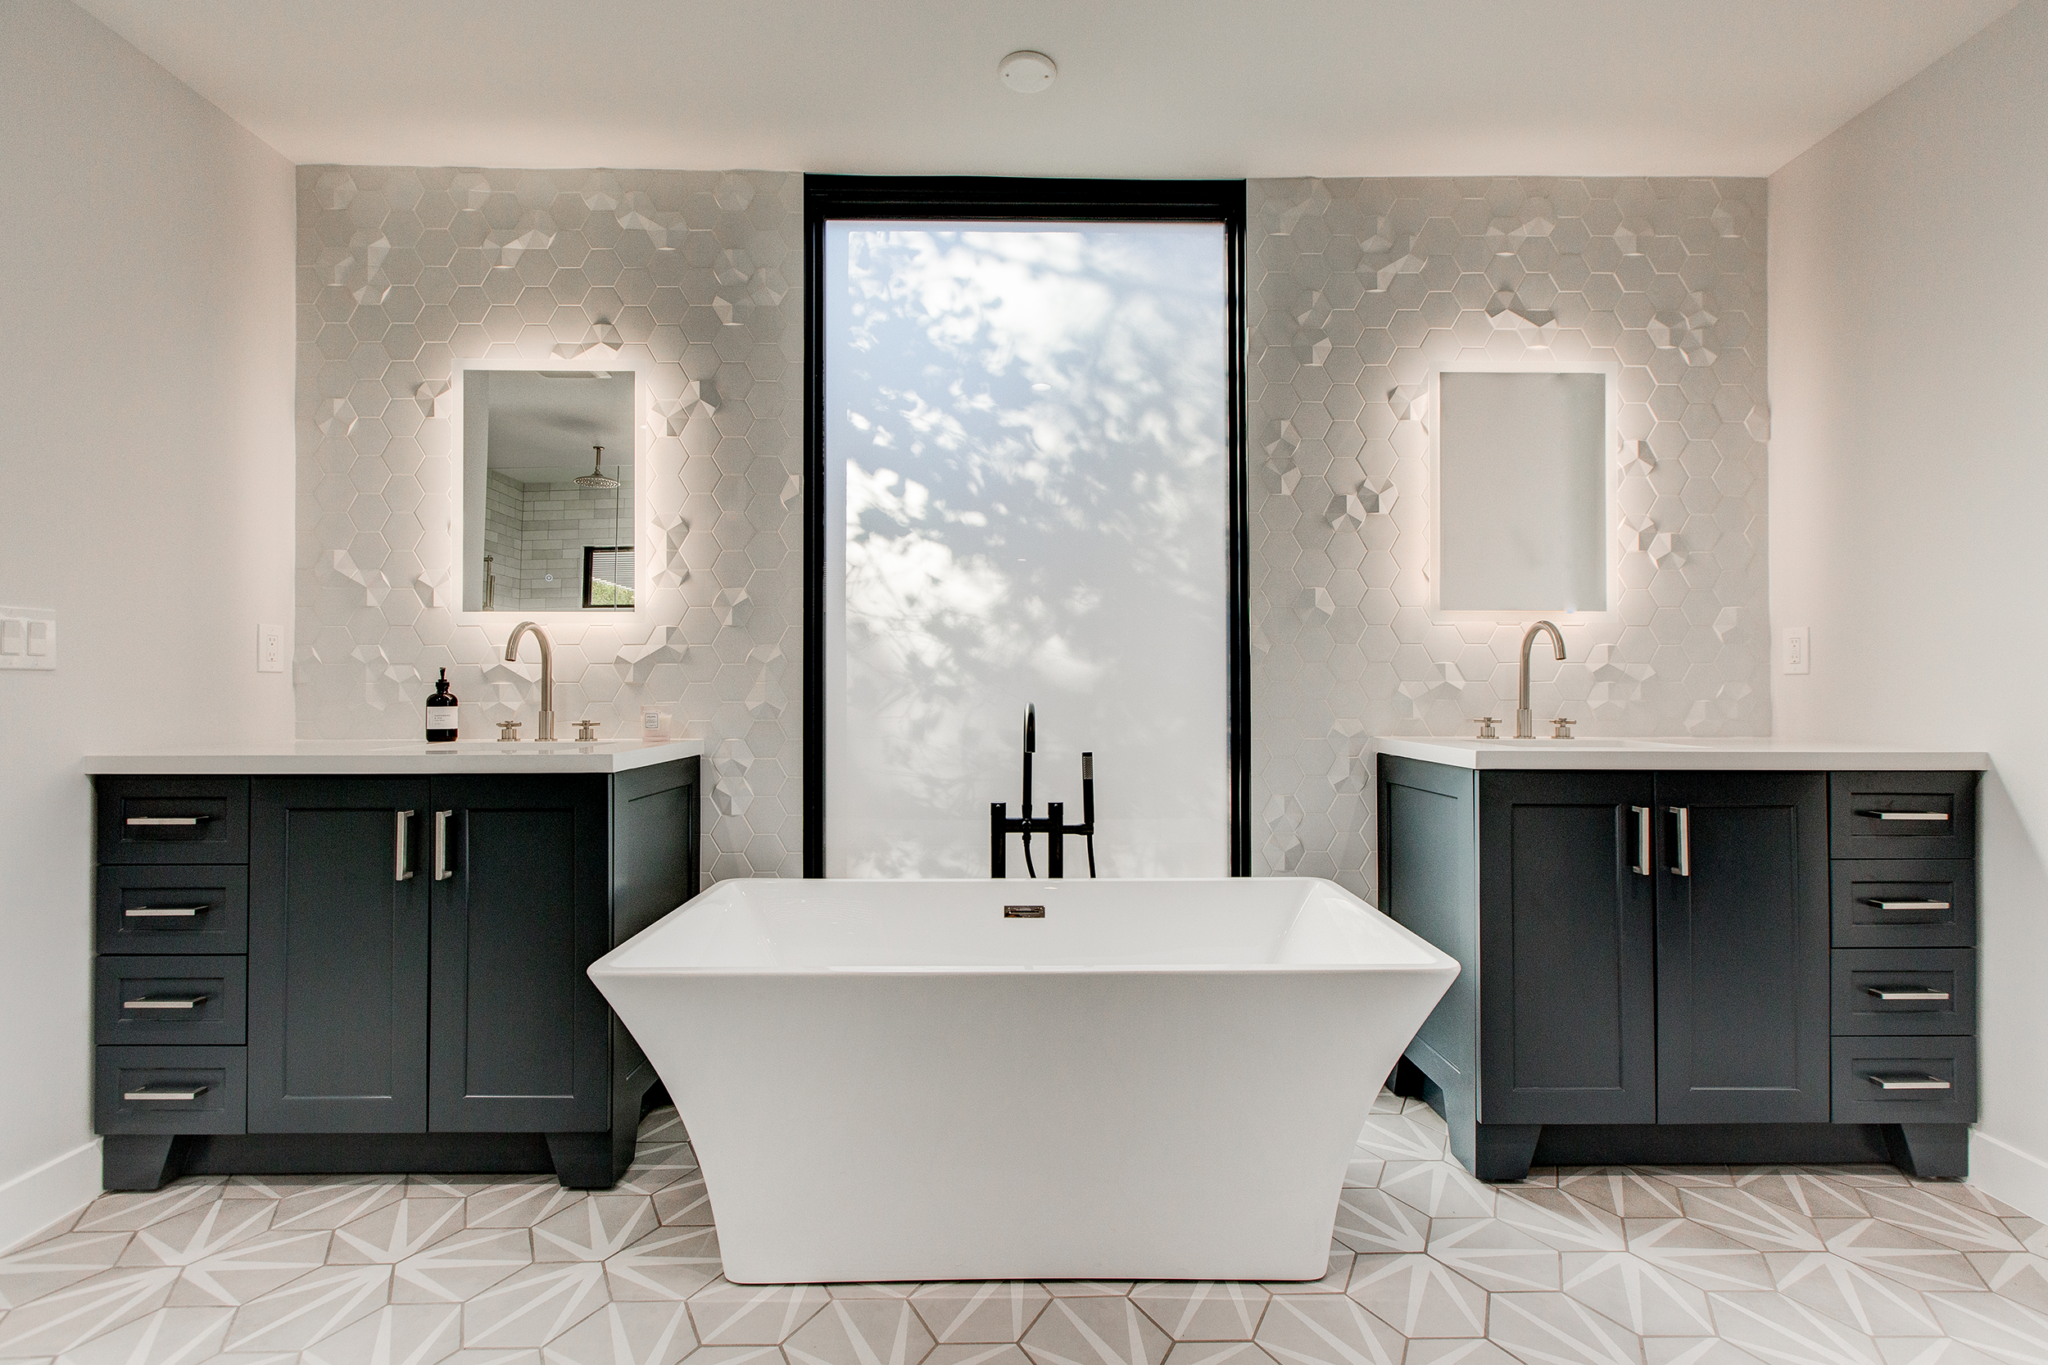 Professional photo of master bath tub and vanities for property listing.